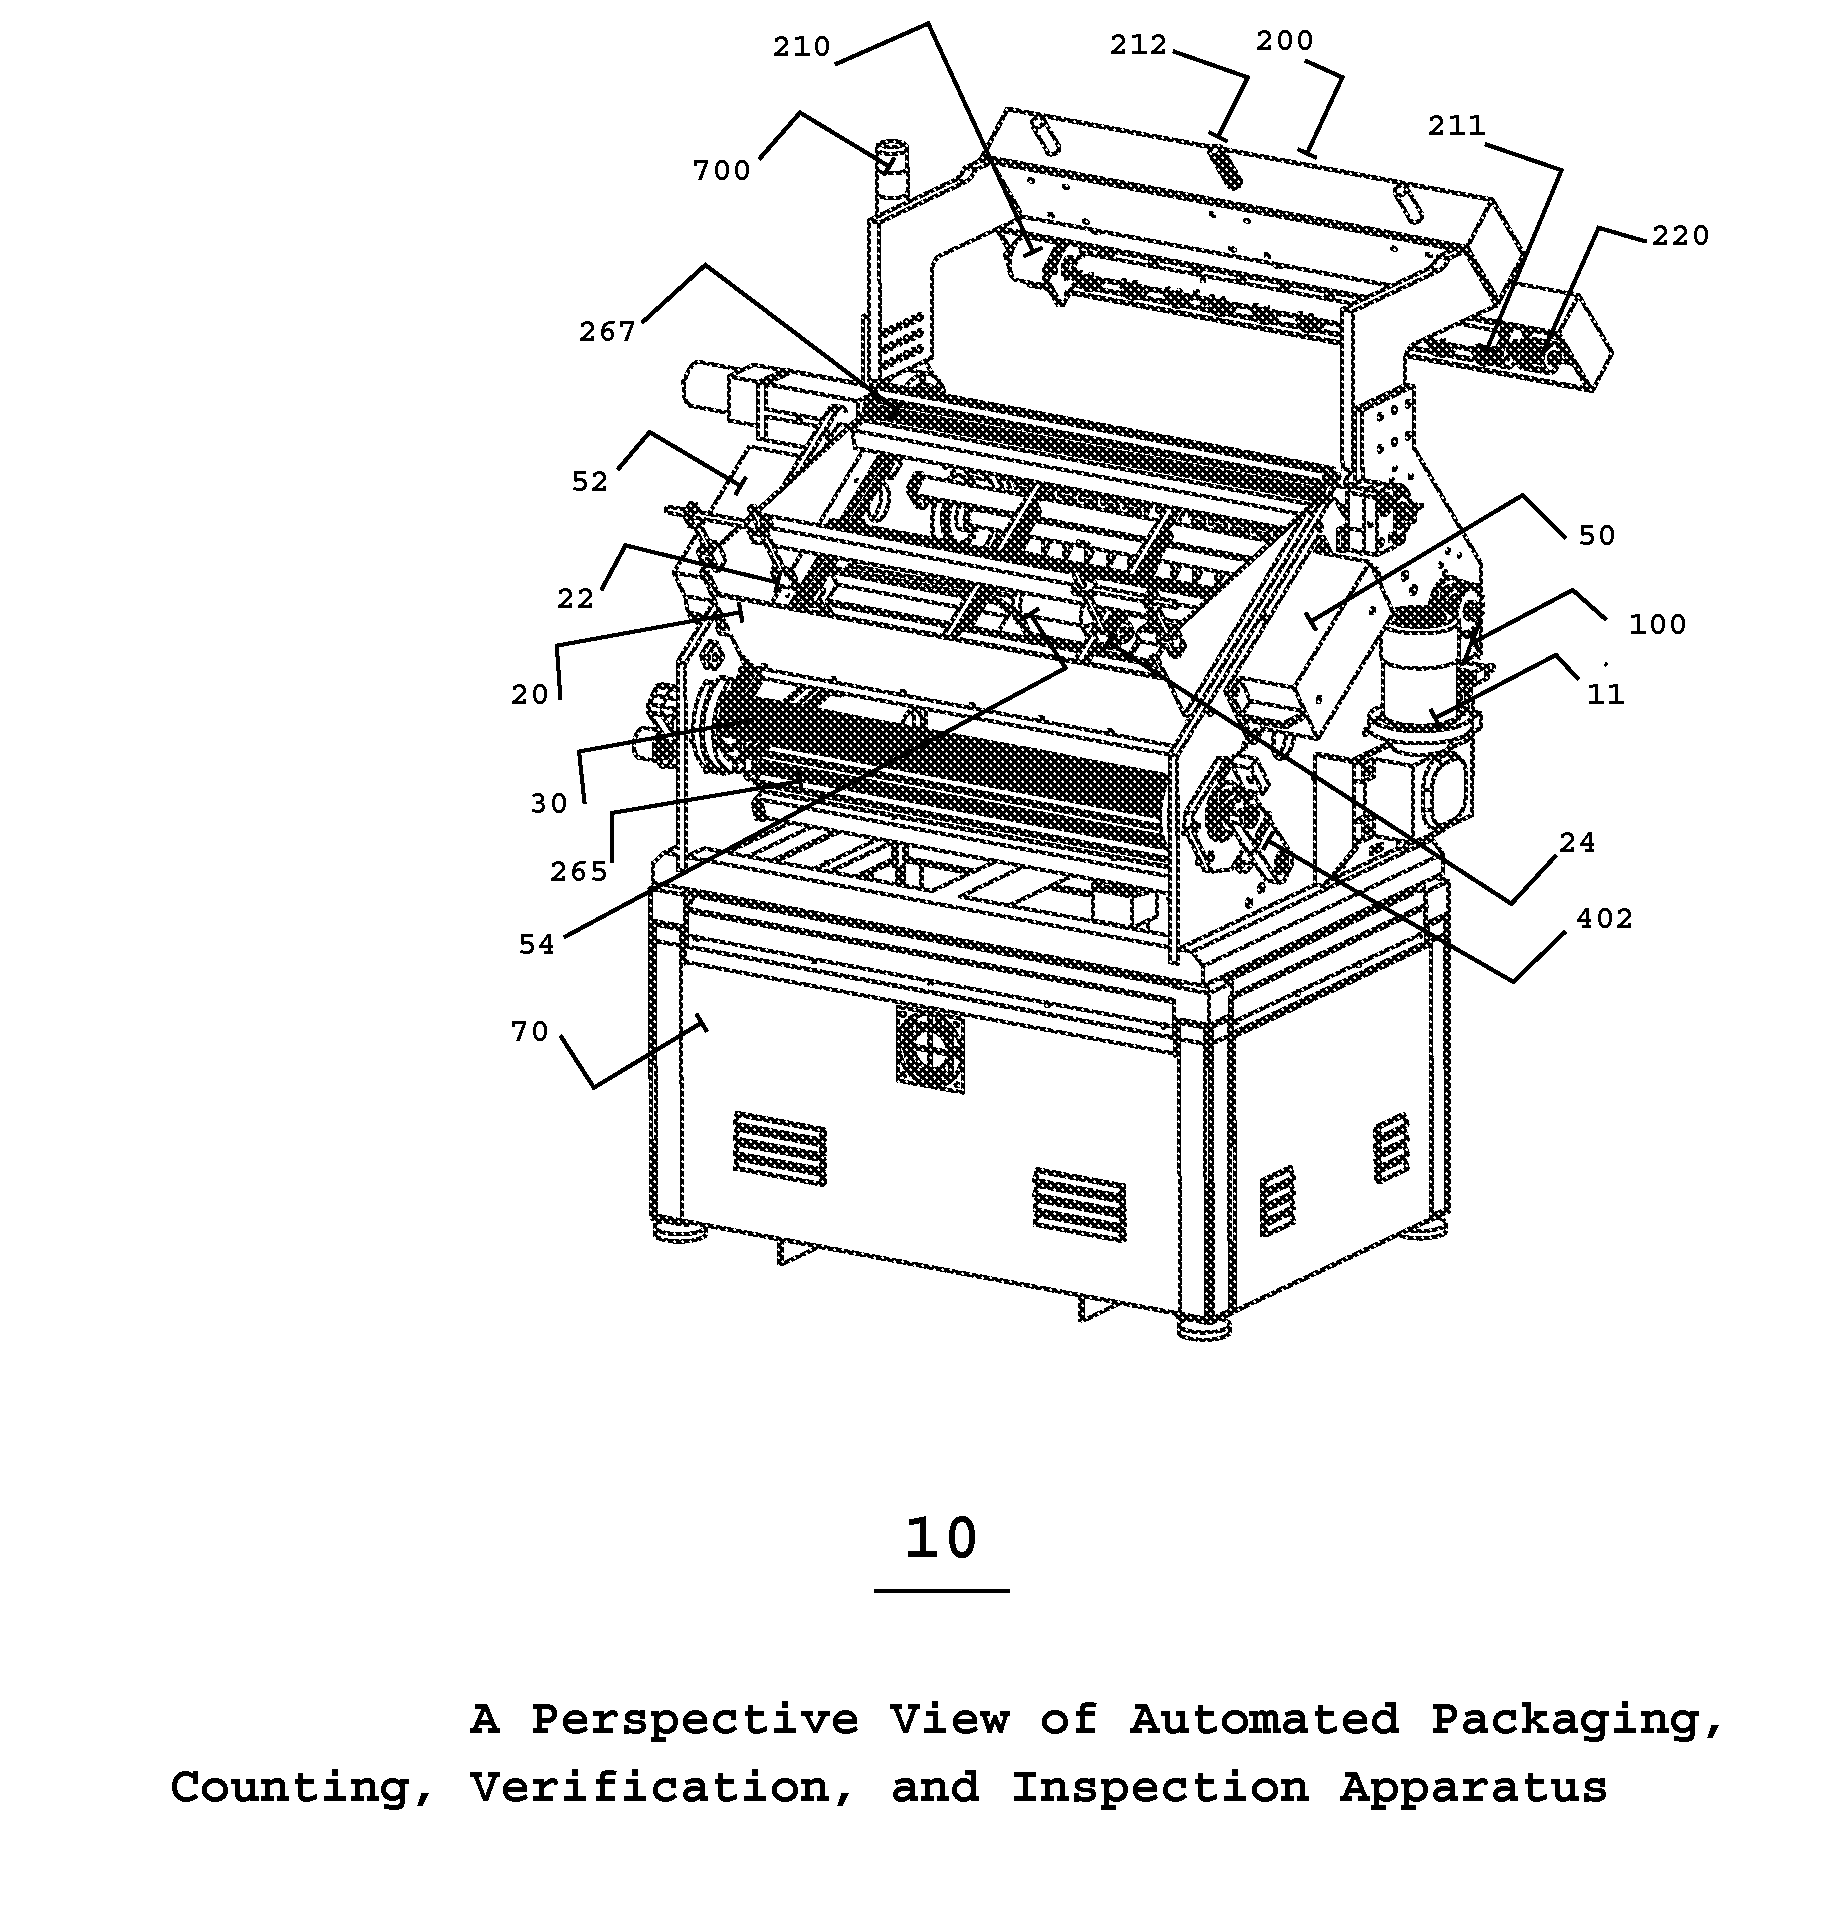 Automated pharmaceutical product packaging, inspection, verification, and counting apparatus